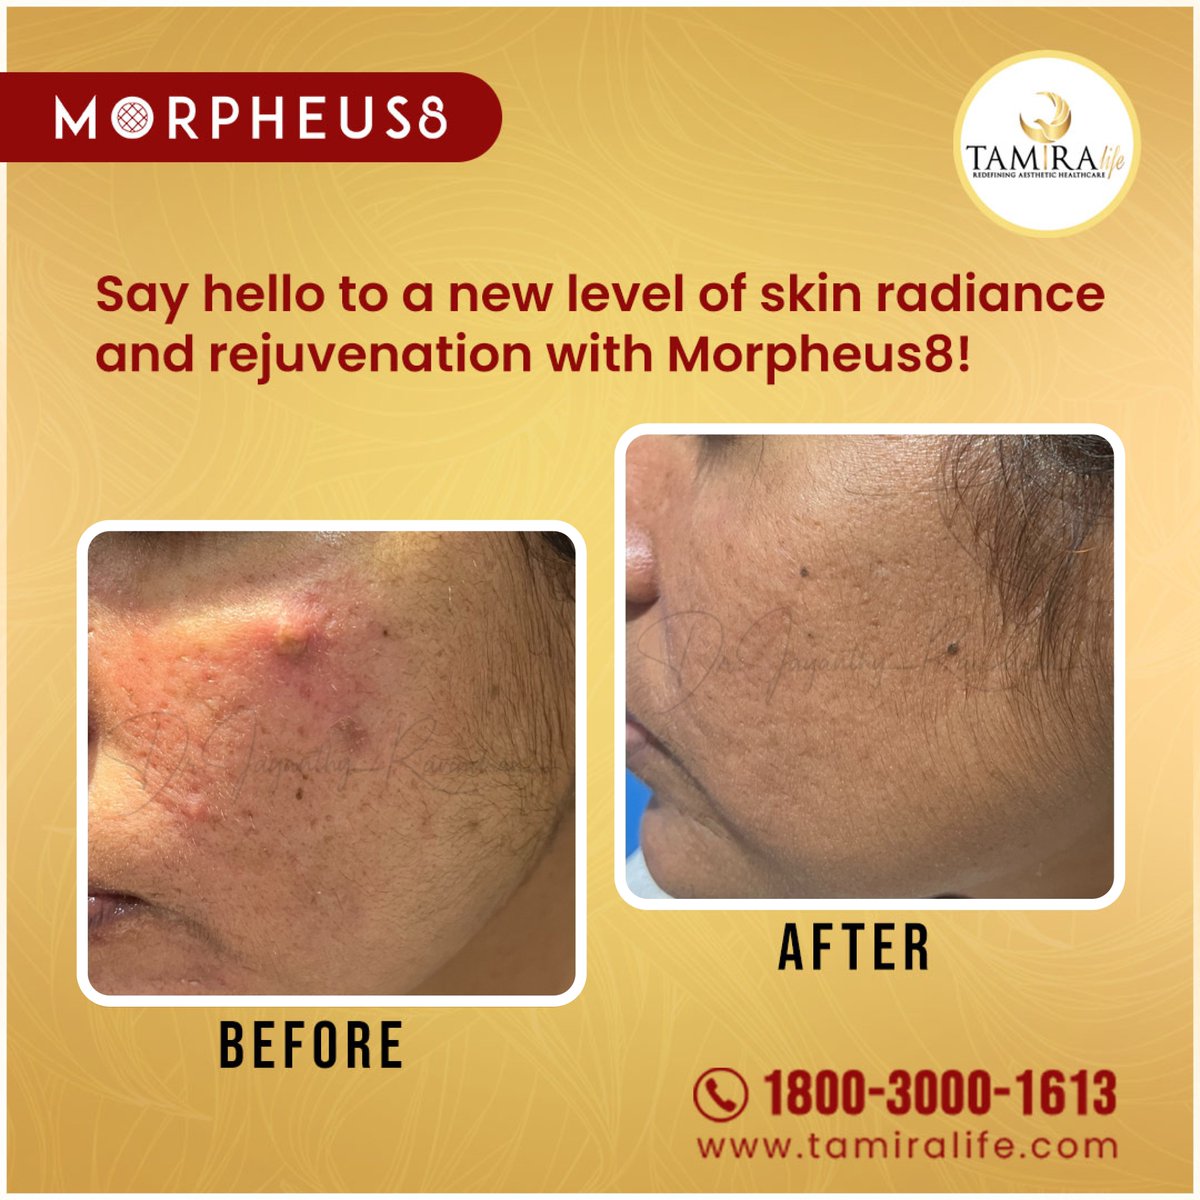 Say hello to a new level of #skinradiance and #rejuvenation with #Morpheus8!
Morpheus 8 is an innovative and cutting-edge #aesthetictreatment that combines #microneedling and #radiofrequency (RF) technology to rejuvenate and transform the #skin. 
For more details: 1800 3000 1613